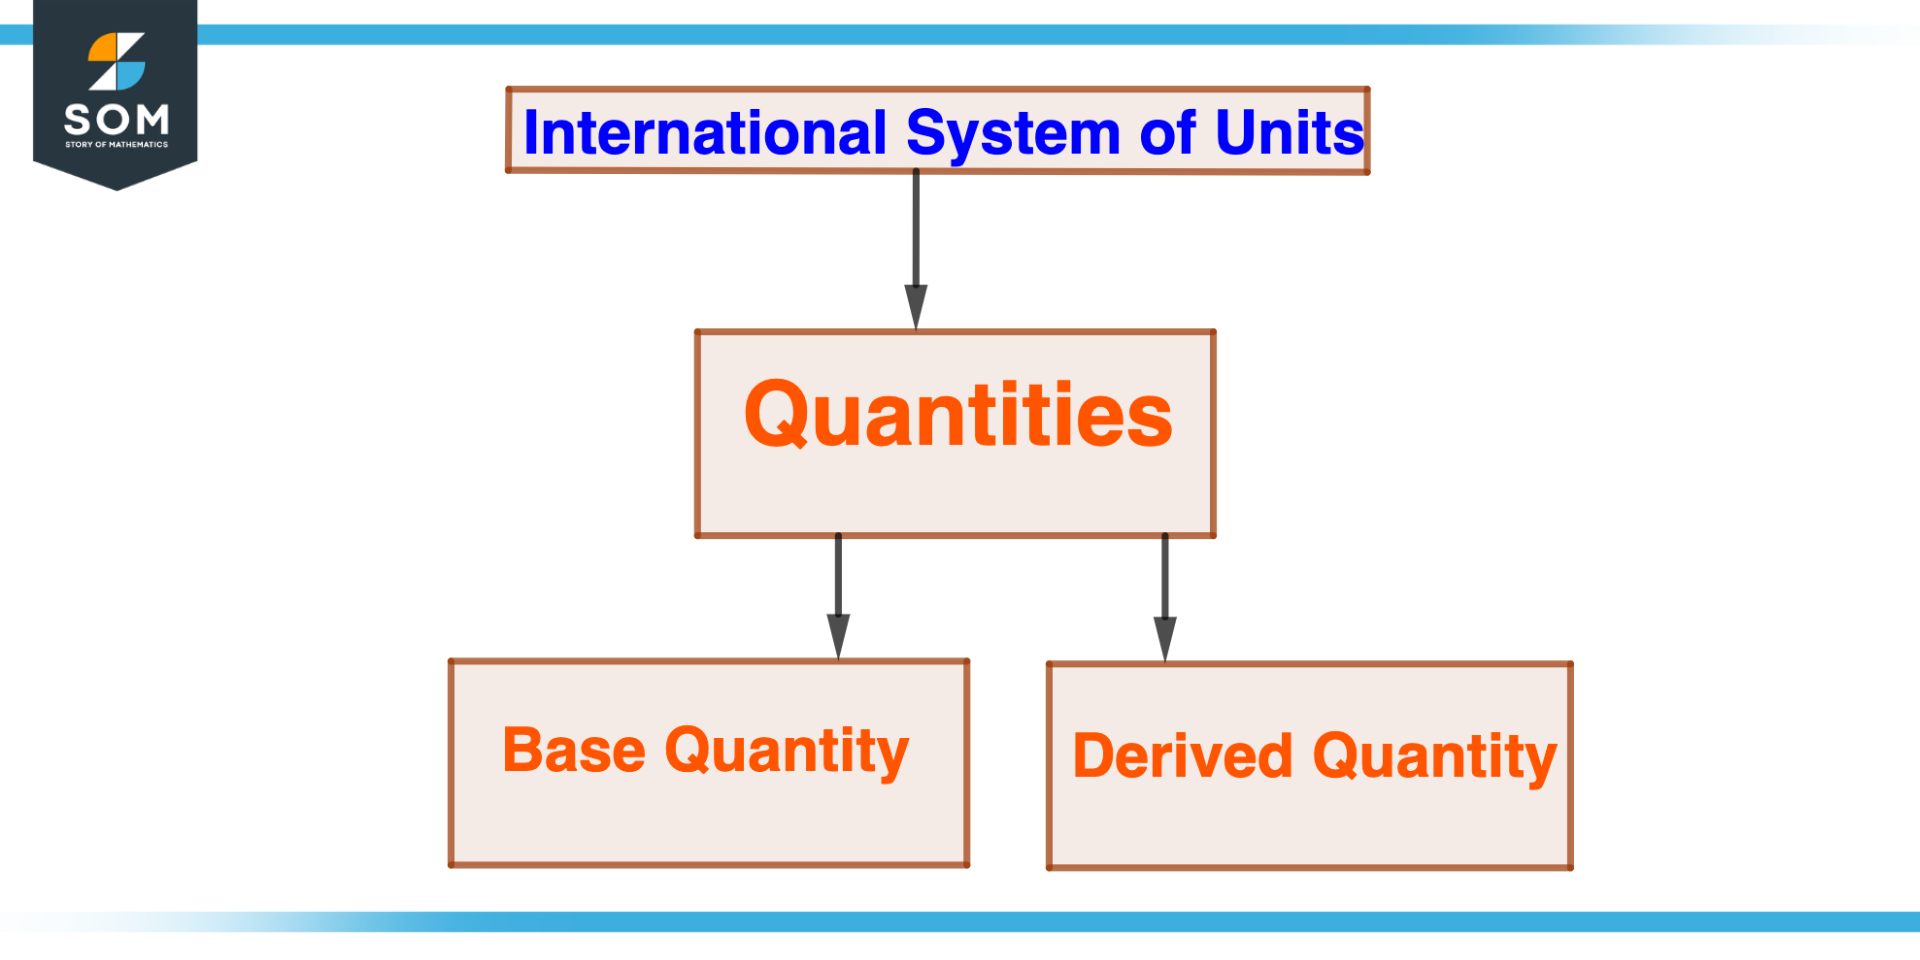 Quantities in International system of units